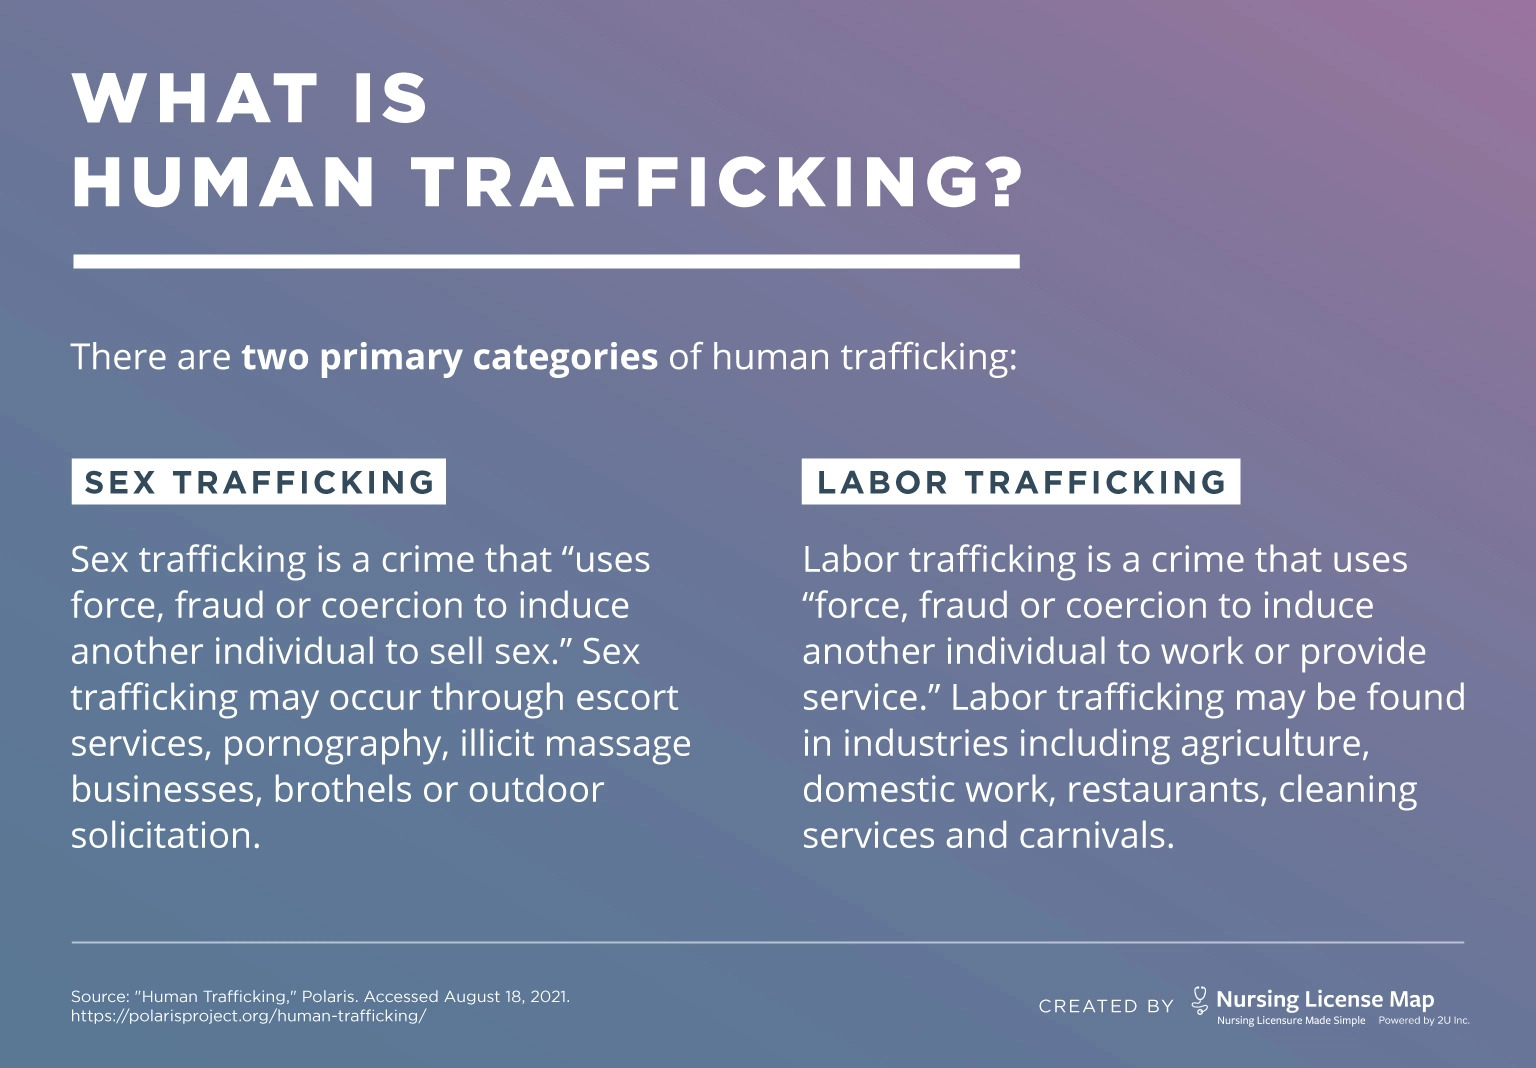 Sex trafficking is a crime that “uses force, fraud or coercion to induce another individual to sell sex.” Sex trafficking may occur through escort services, pornography, illicit massage businesses, brothels or outdoor solicitation.